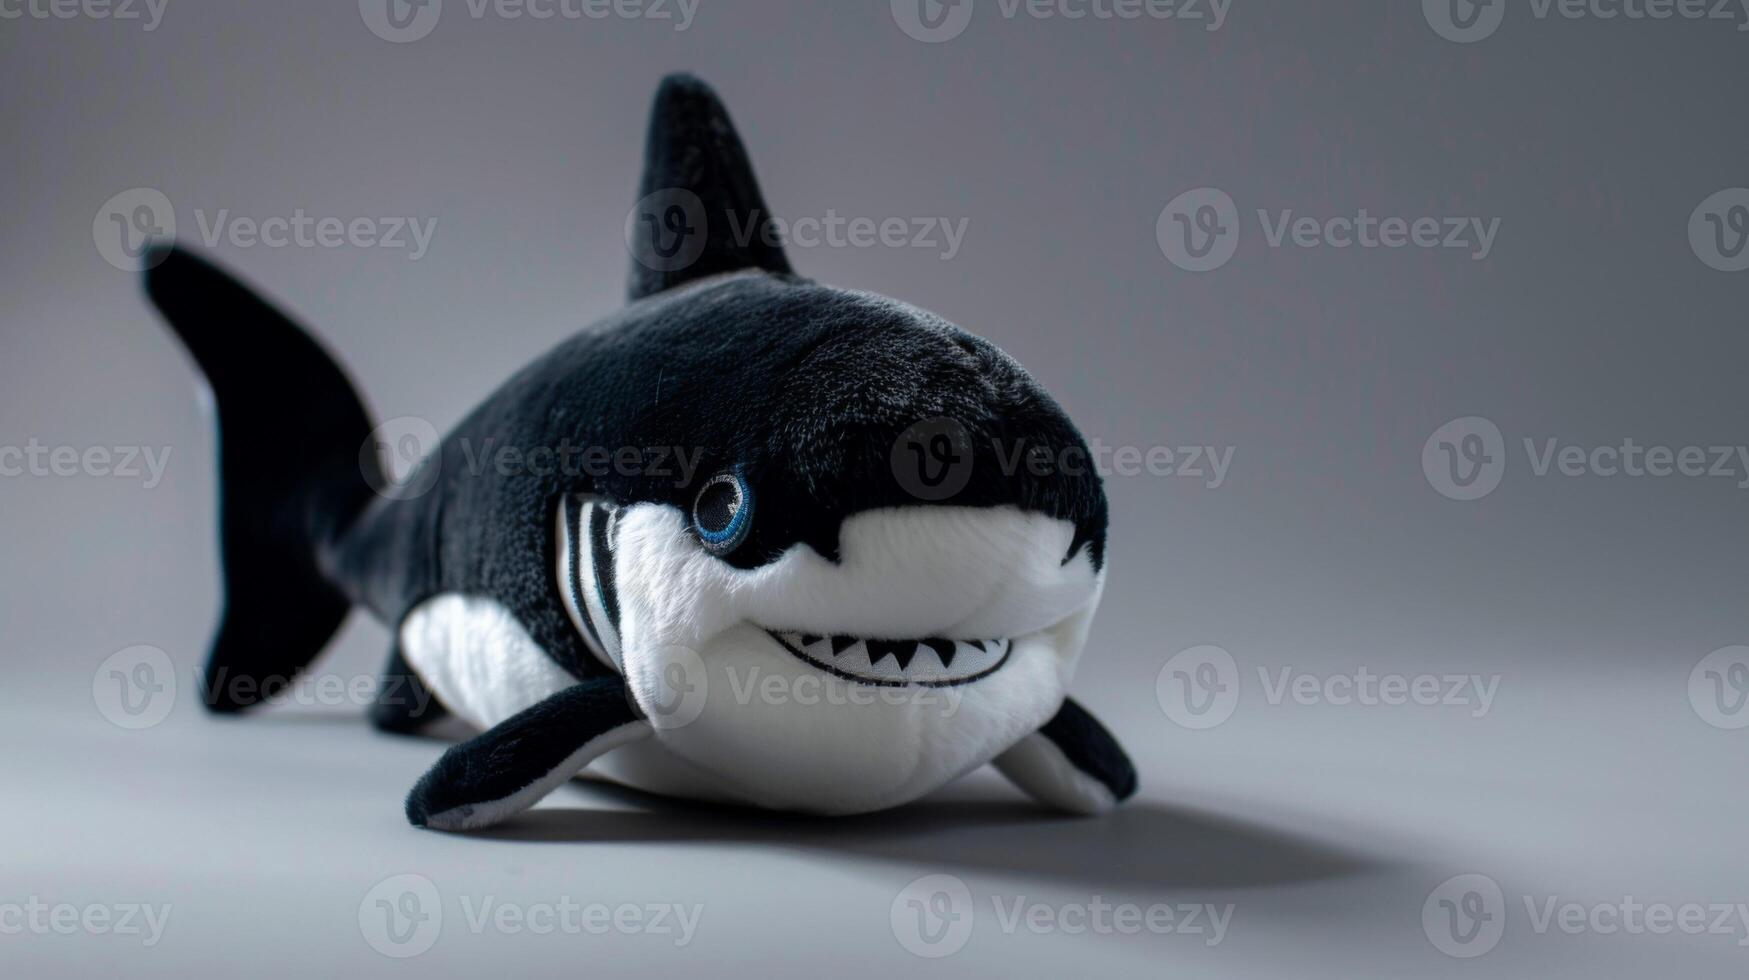 Shark plush toy with a cute and soft stuffed animal design features marine predator characteristics photo